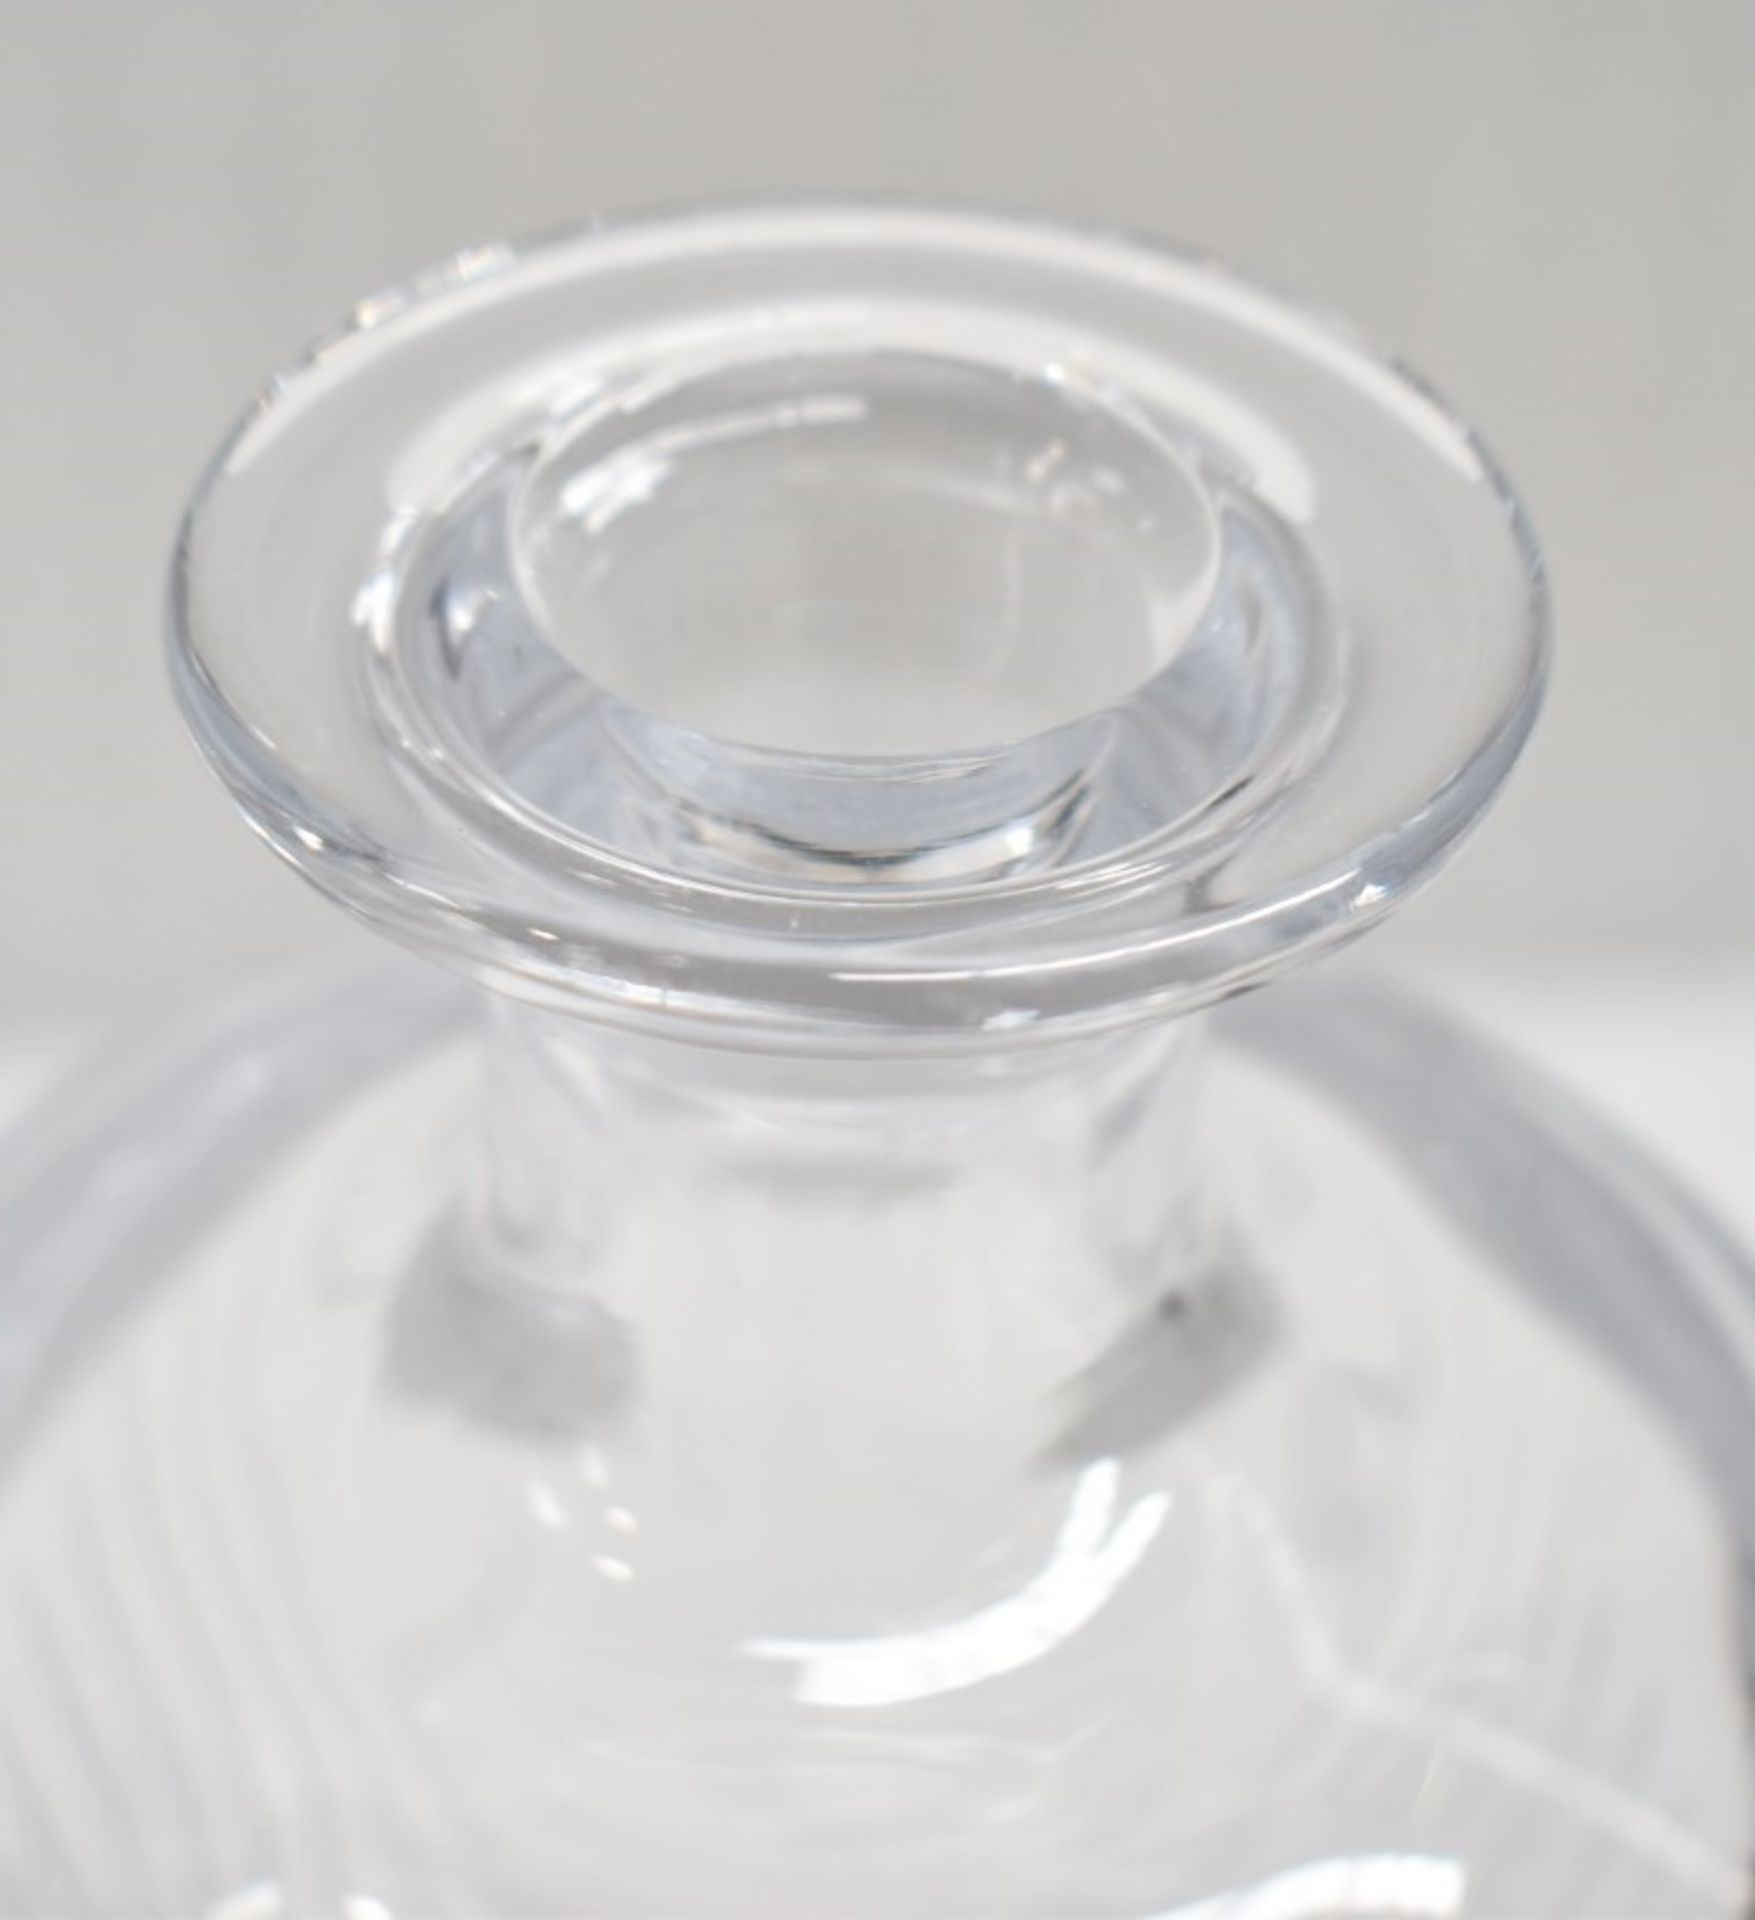 1 x SOHO HOUSE 'Roebling' Large Glass Decanter (750ml) - Original Price £135.00 - Unused Boxed Stock - Image 4 of 8